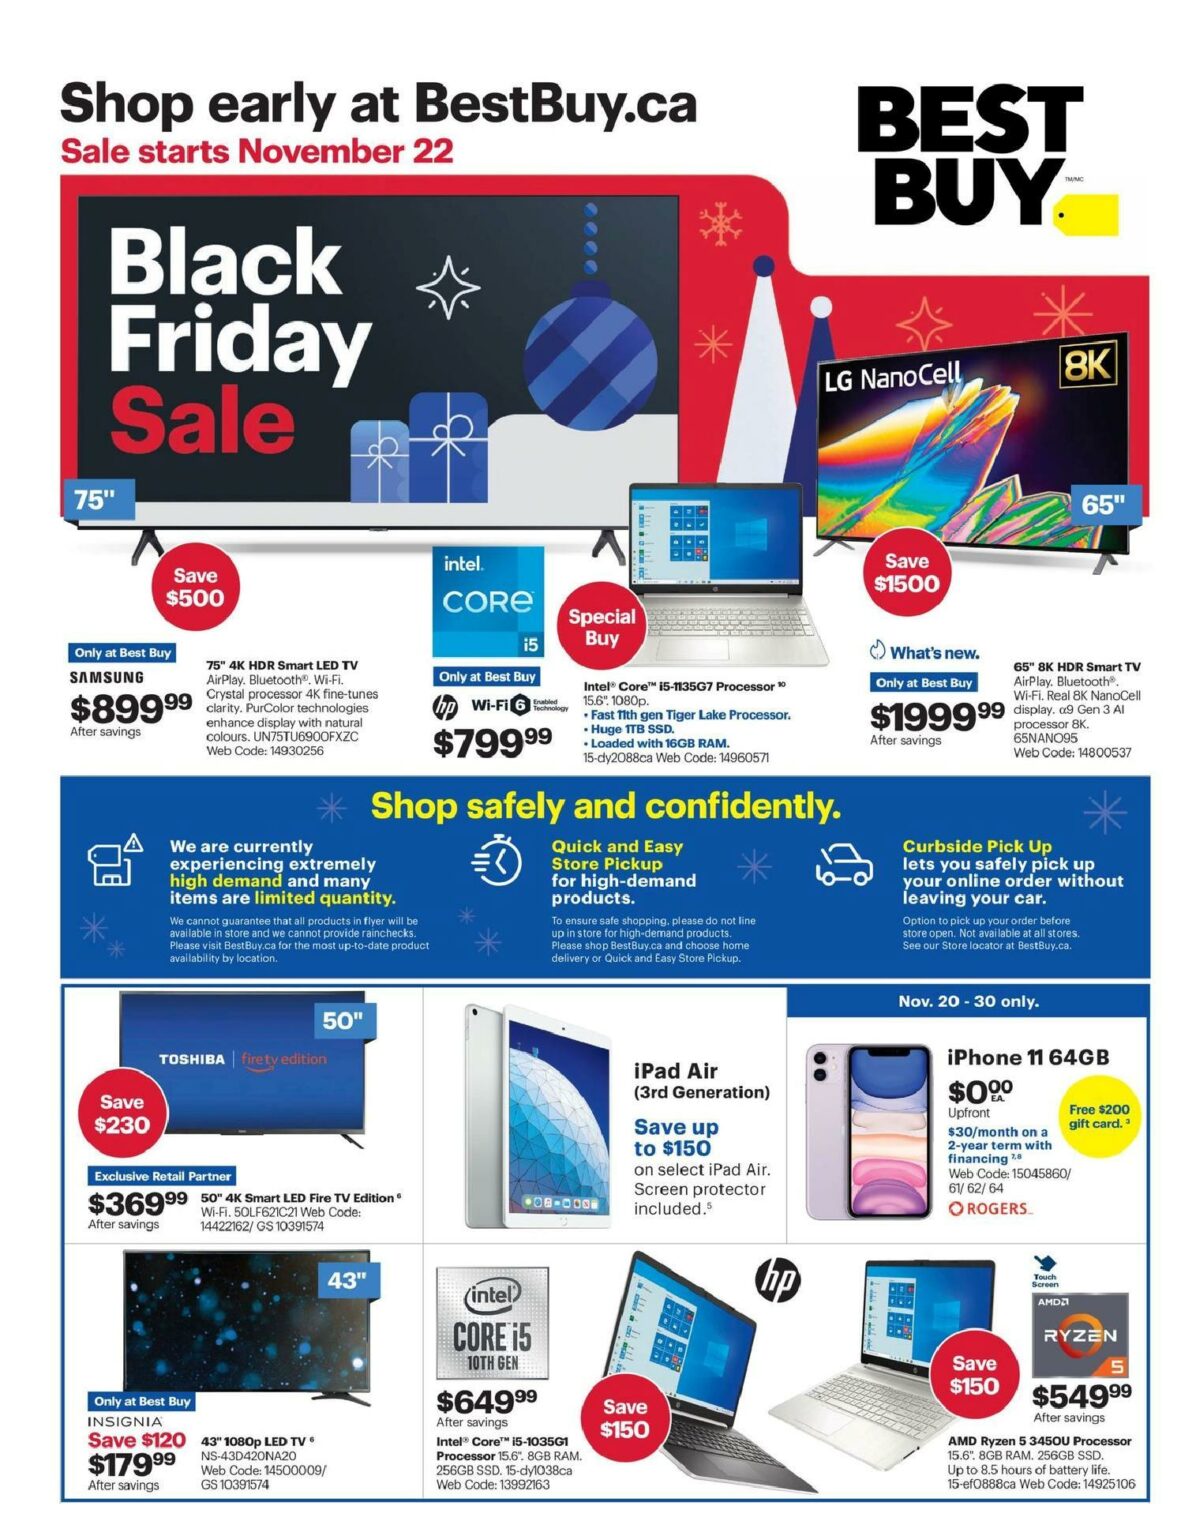 Best Buy Black Friday Flyer Deals 2020 Canada - How To Shop For Black Friday Deals